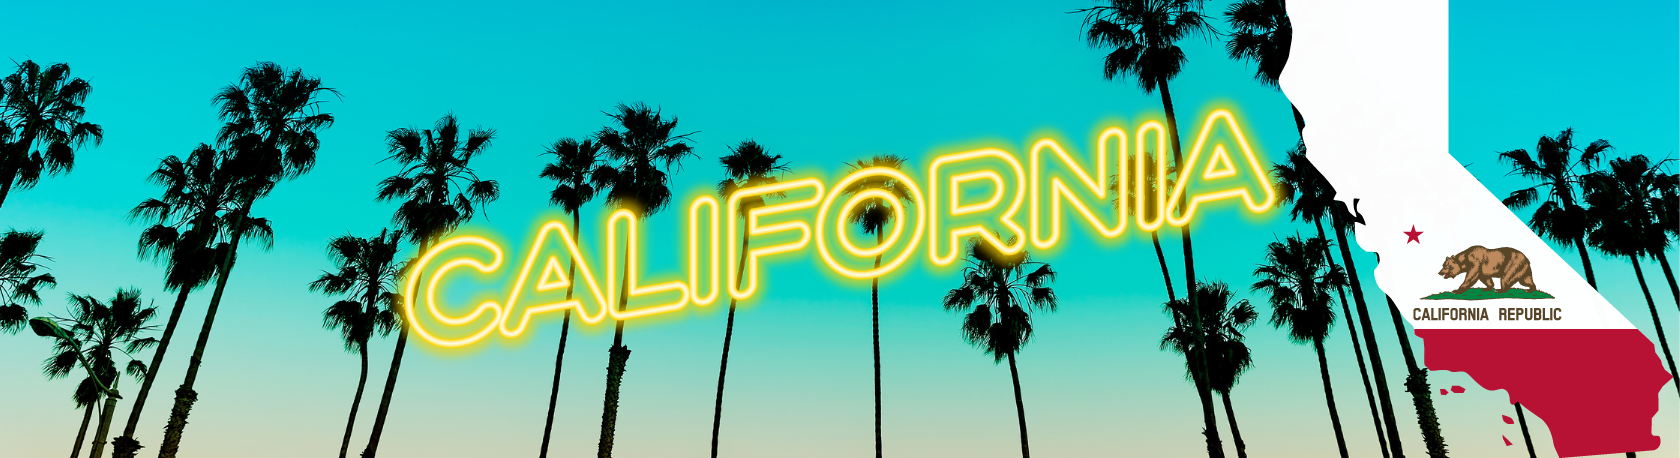 Master your Spanish listening skills while learning the history of the name 'California' - Spanish Podcast - Spanish Listening - Speak Spanish - Practice Spanish - Learn Spanish - Easy Español